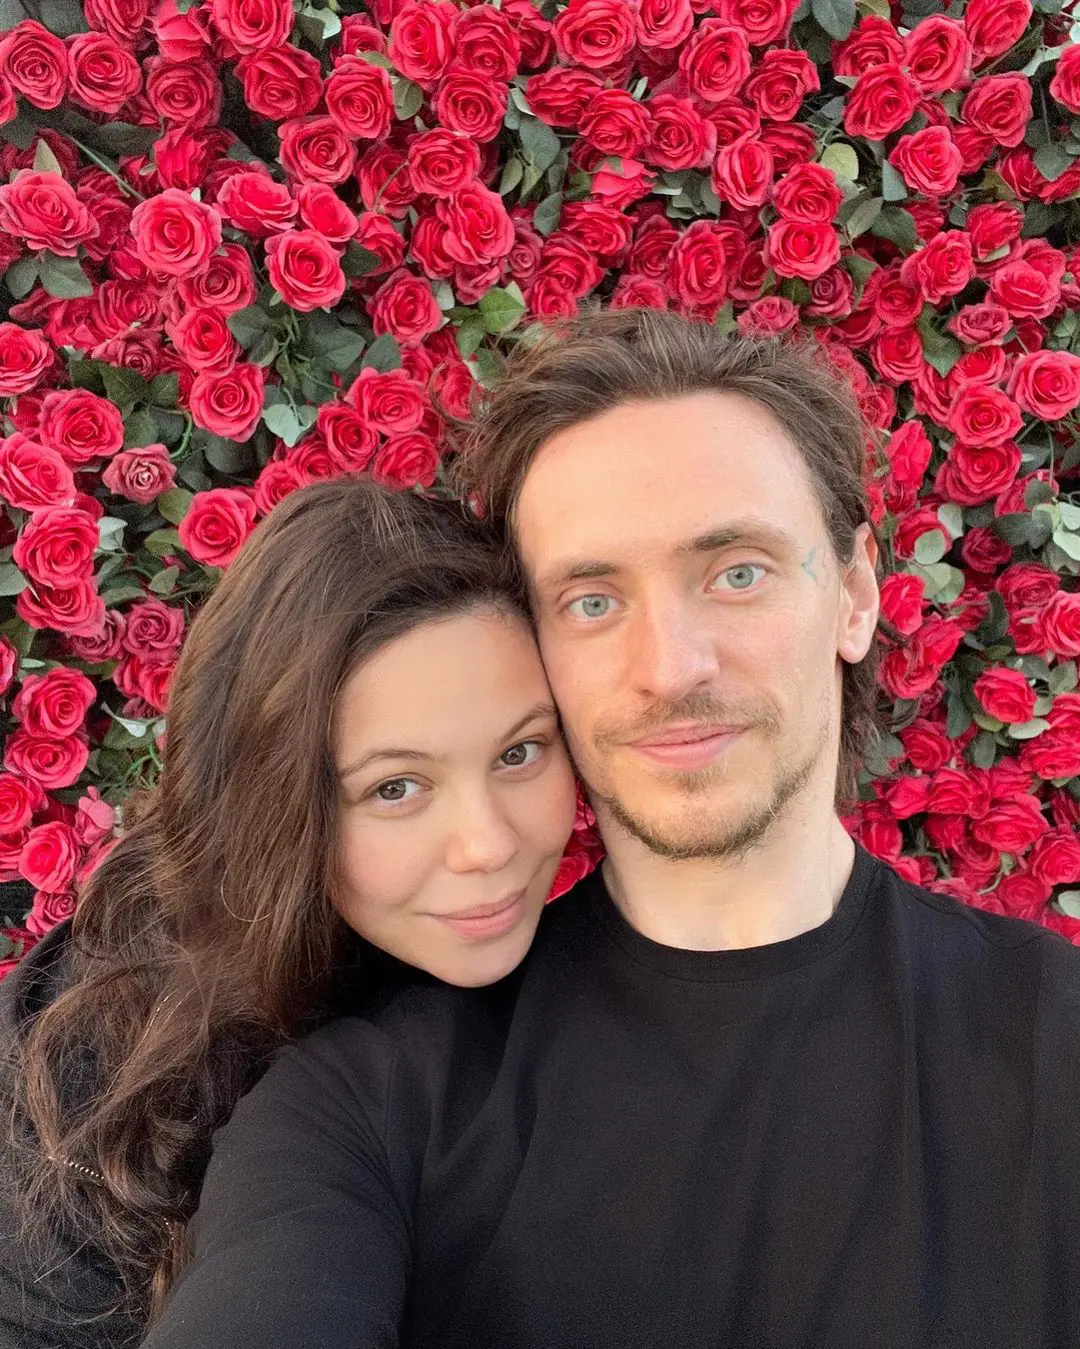 Sergei and Elena poses in front of roses on Valentine's Day in February 2022.